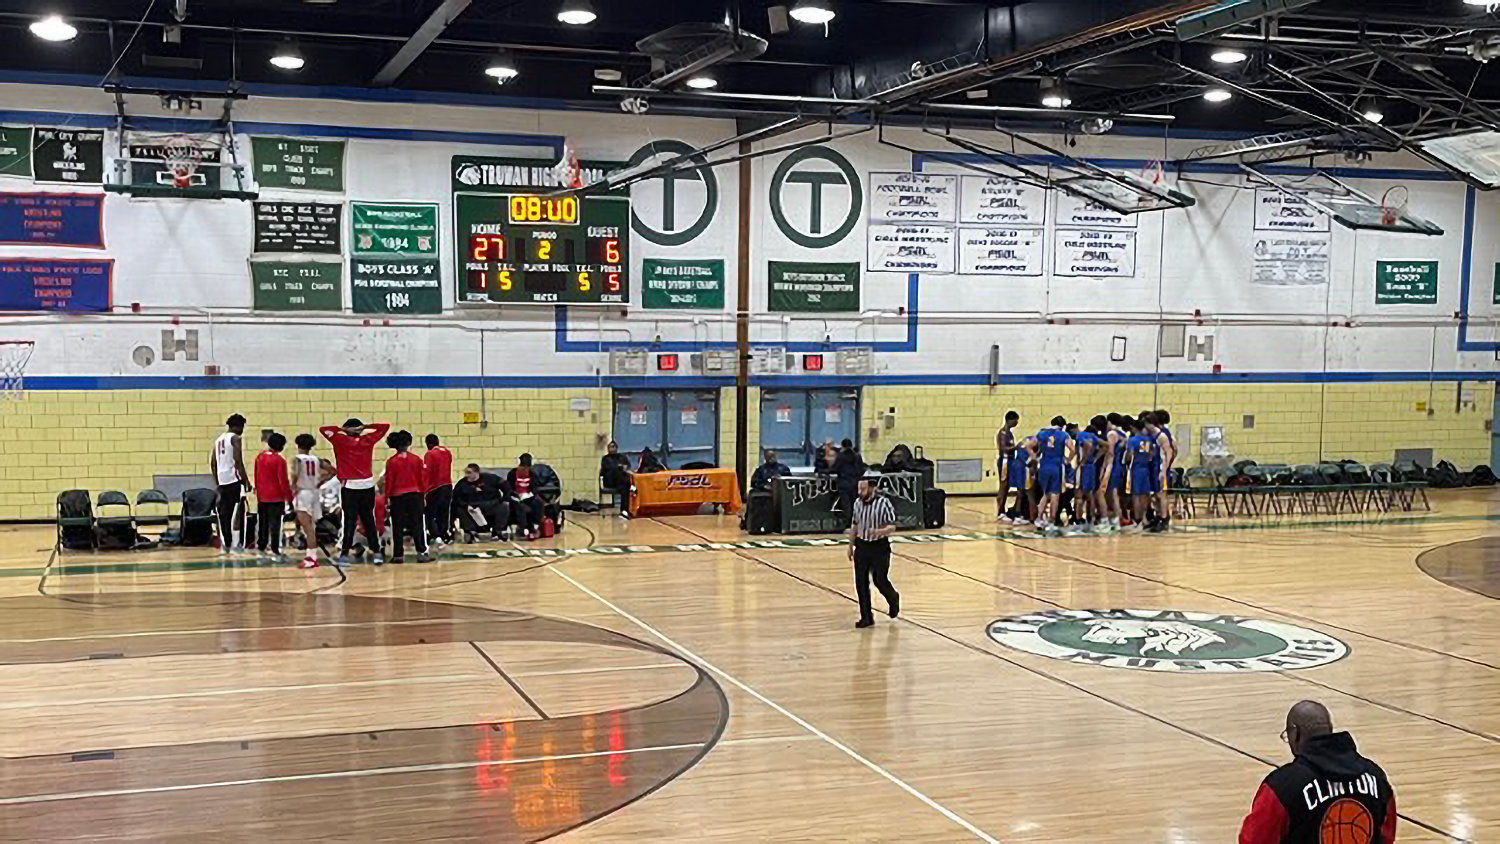 Players from DeWitt Clinton and Truman high schools prep during a timeout of the Governors’ 73-35 thrashing of Truman High School Saturday morning.